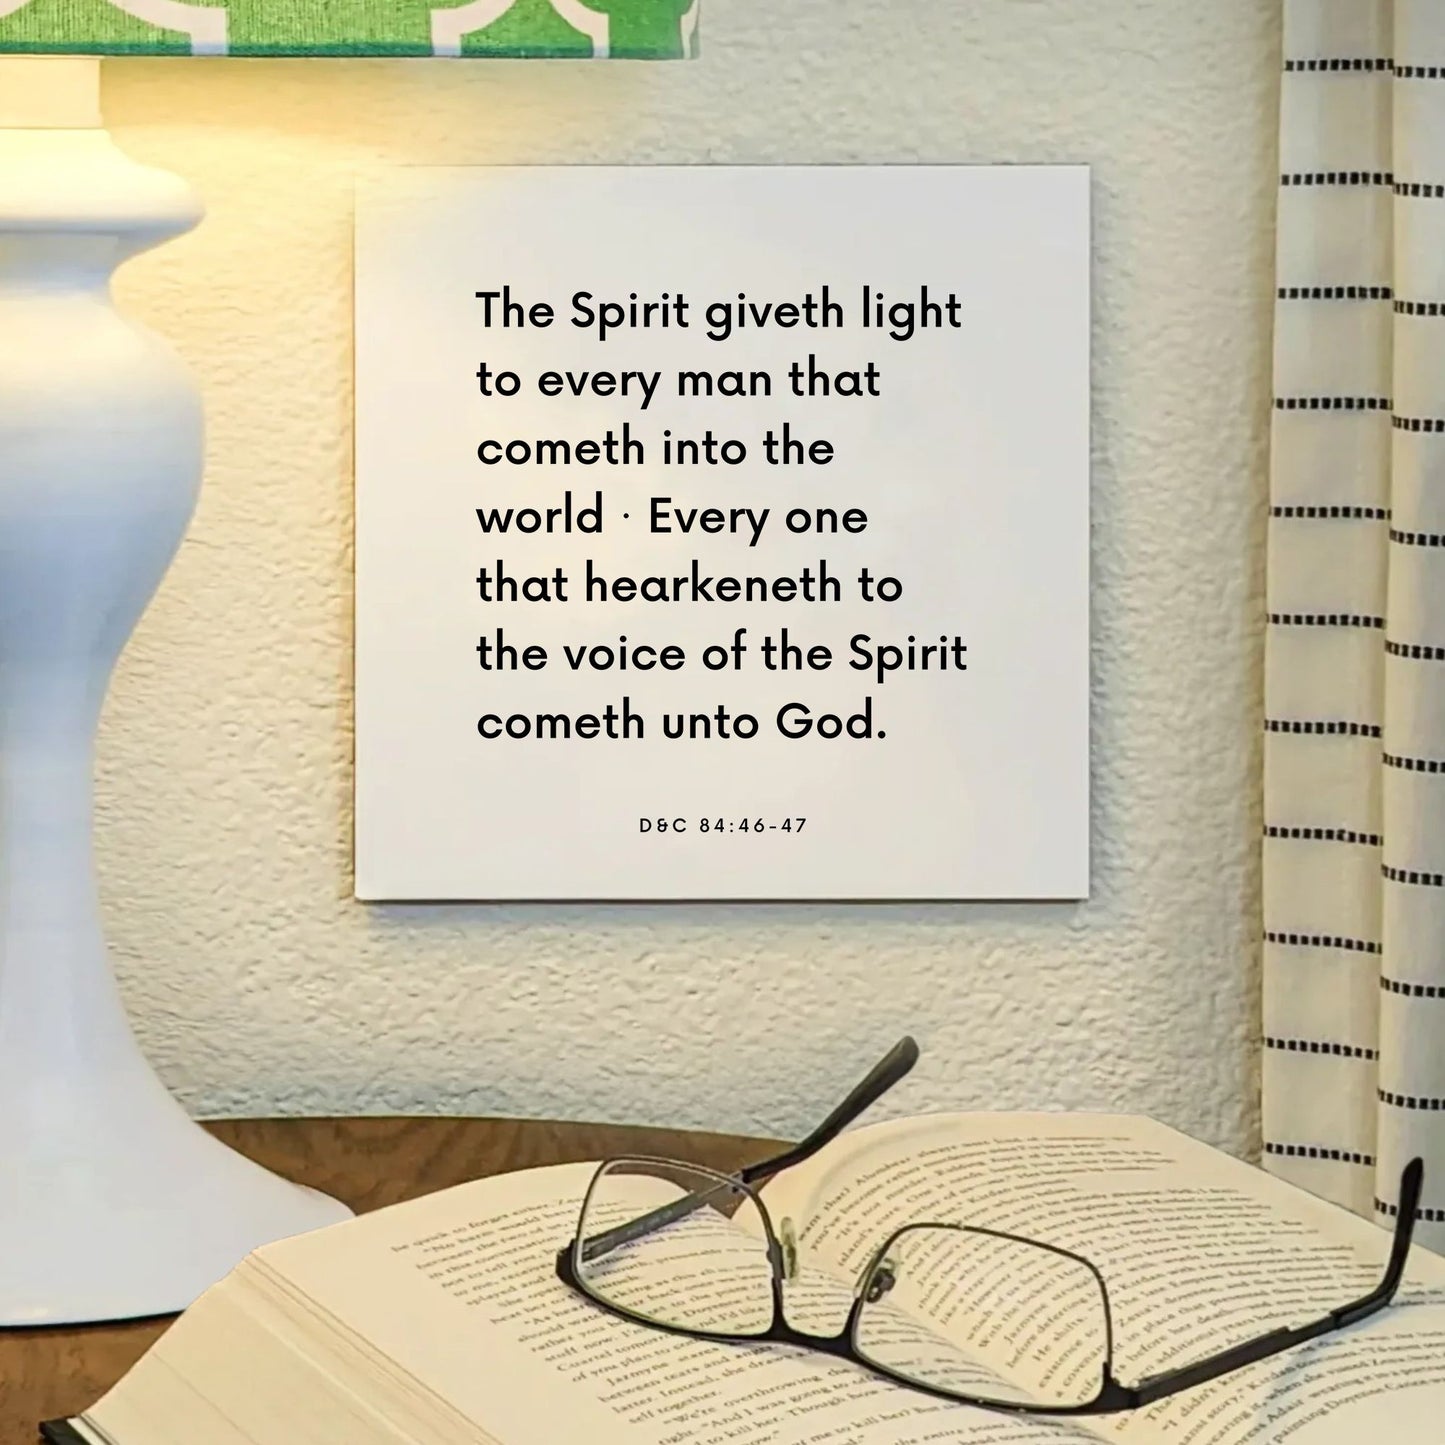 Lamp mouting of the scripture tile for D&C 84:46-47 - "The Spirit giveth light to every man"